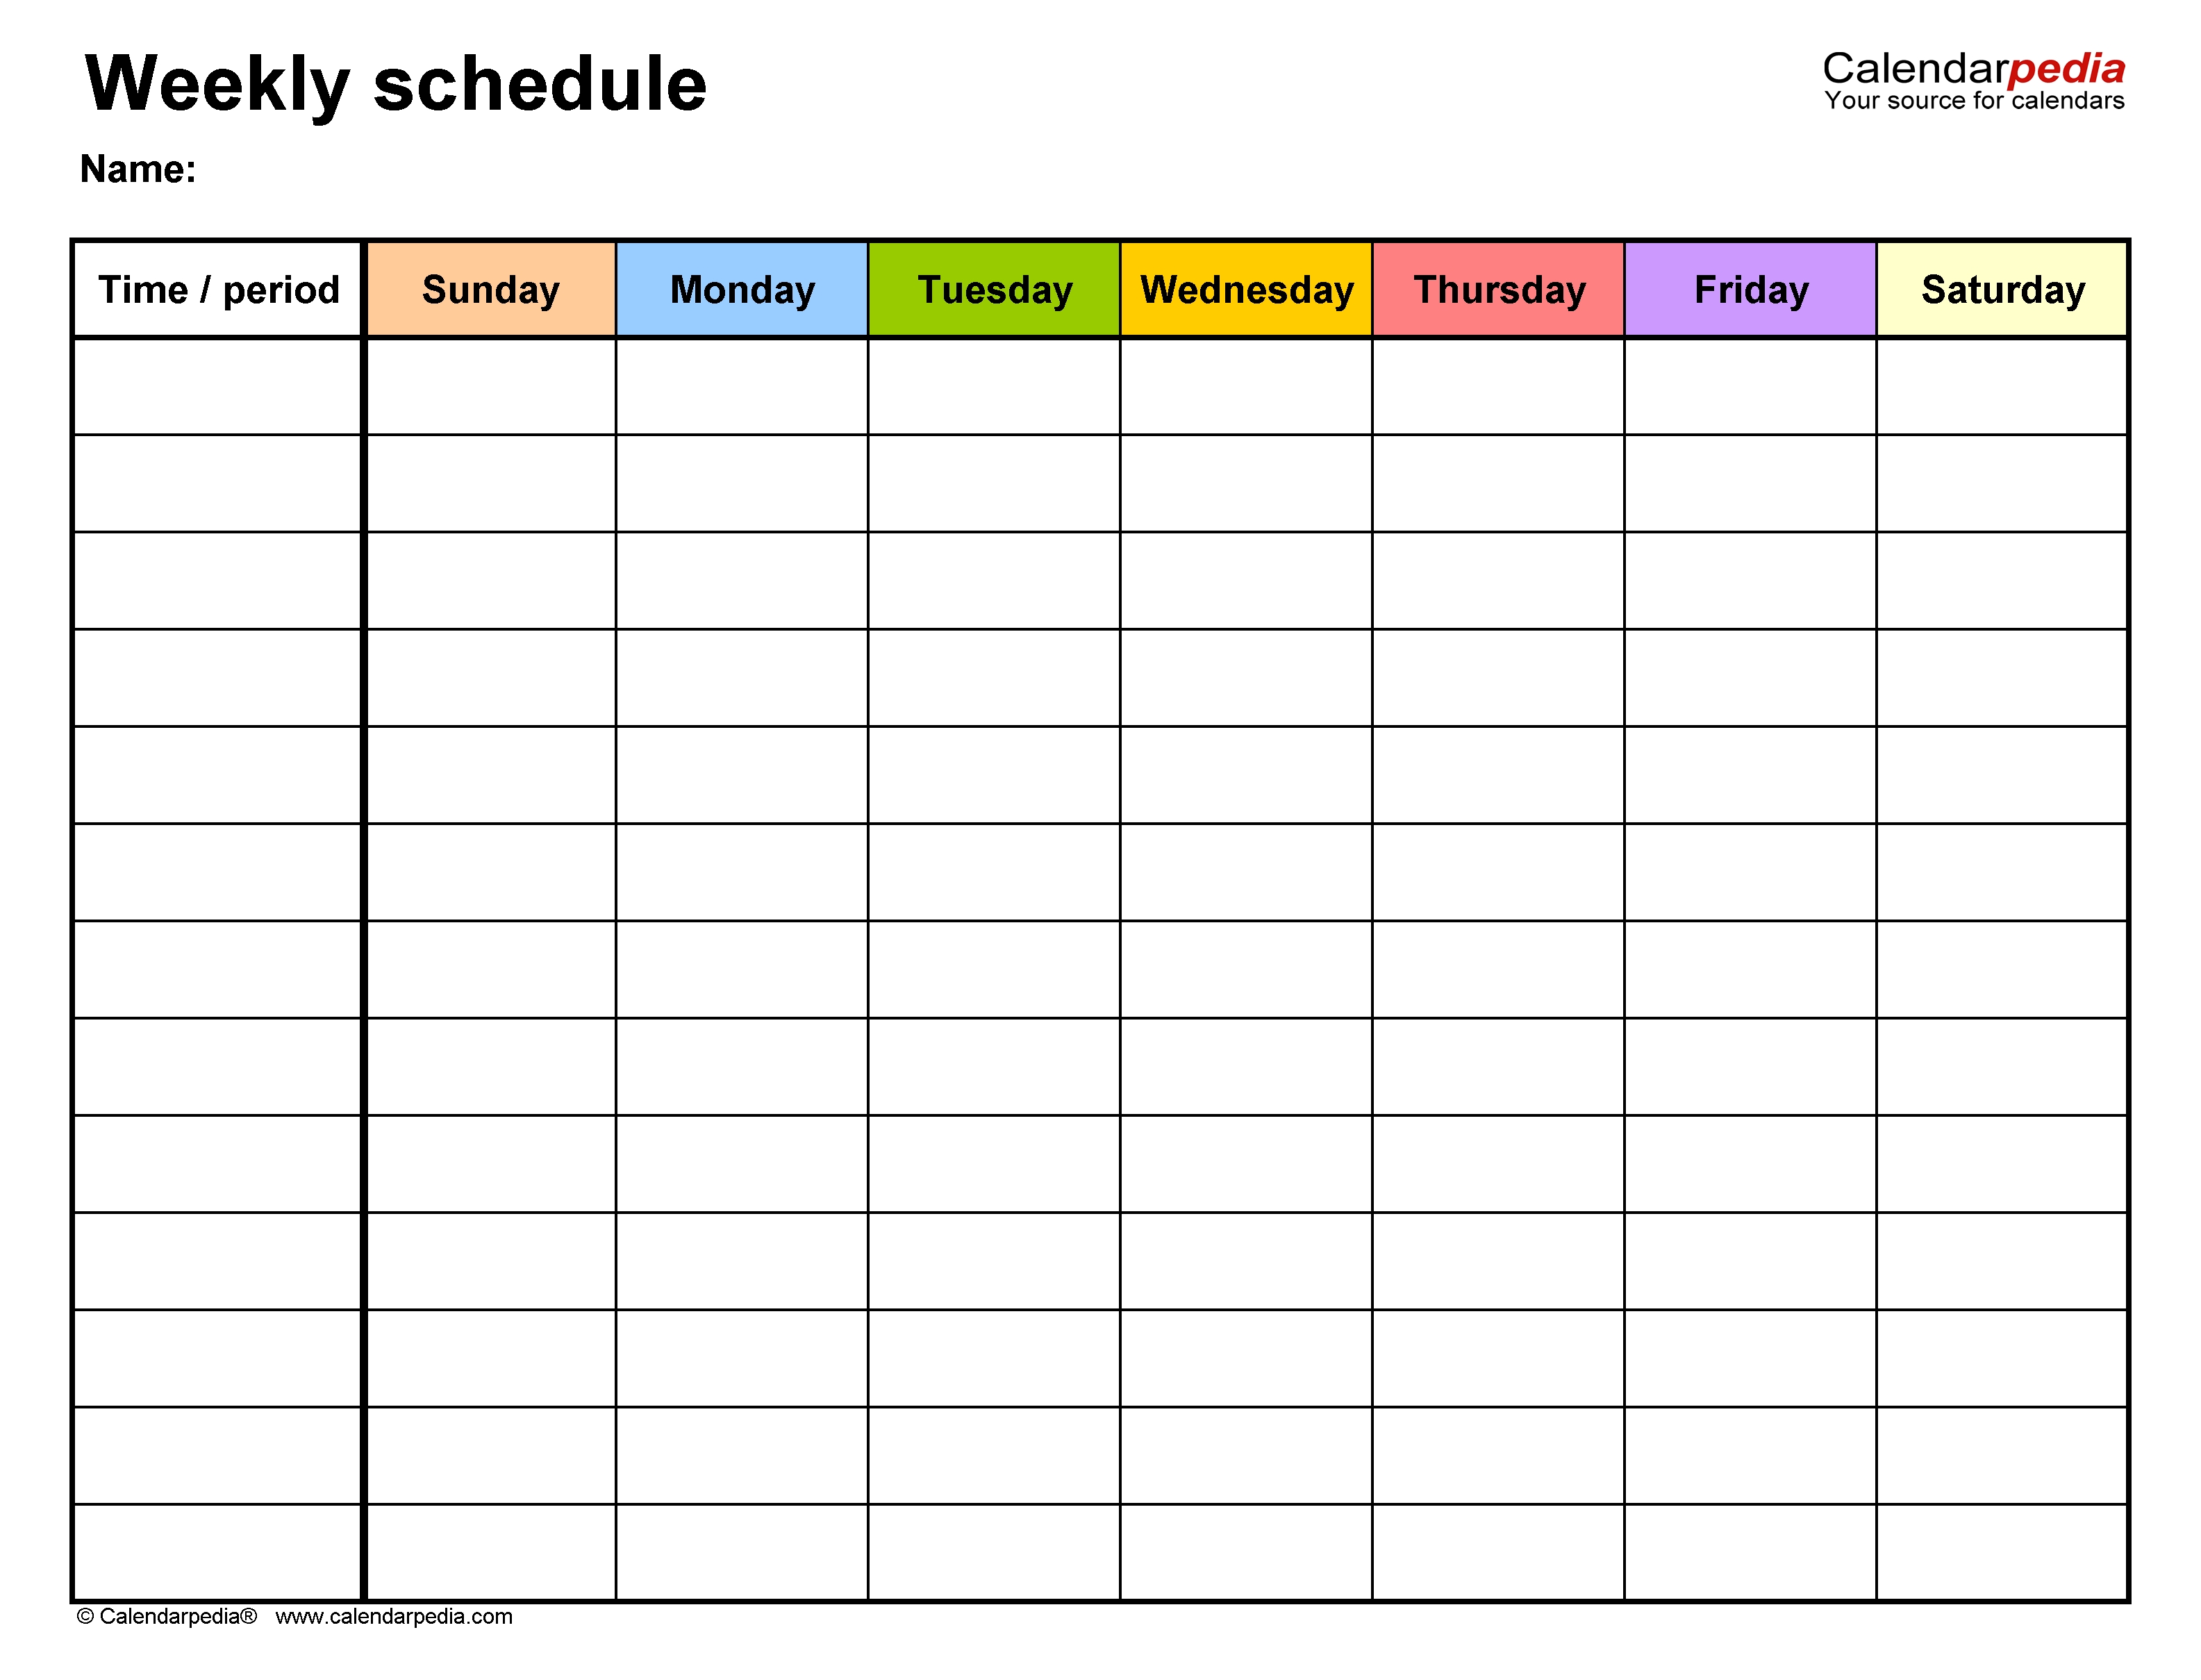 Free Weekly Schedule Templates For Word - 18 Templates  7 Day Planner Printable